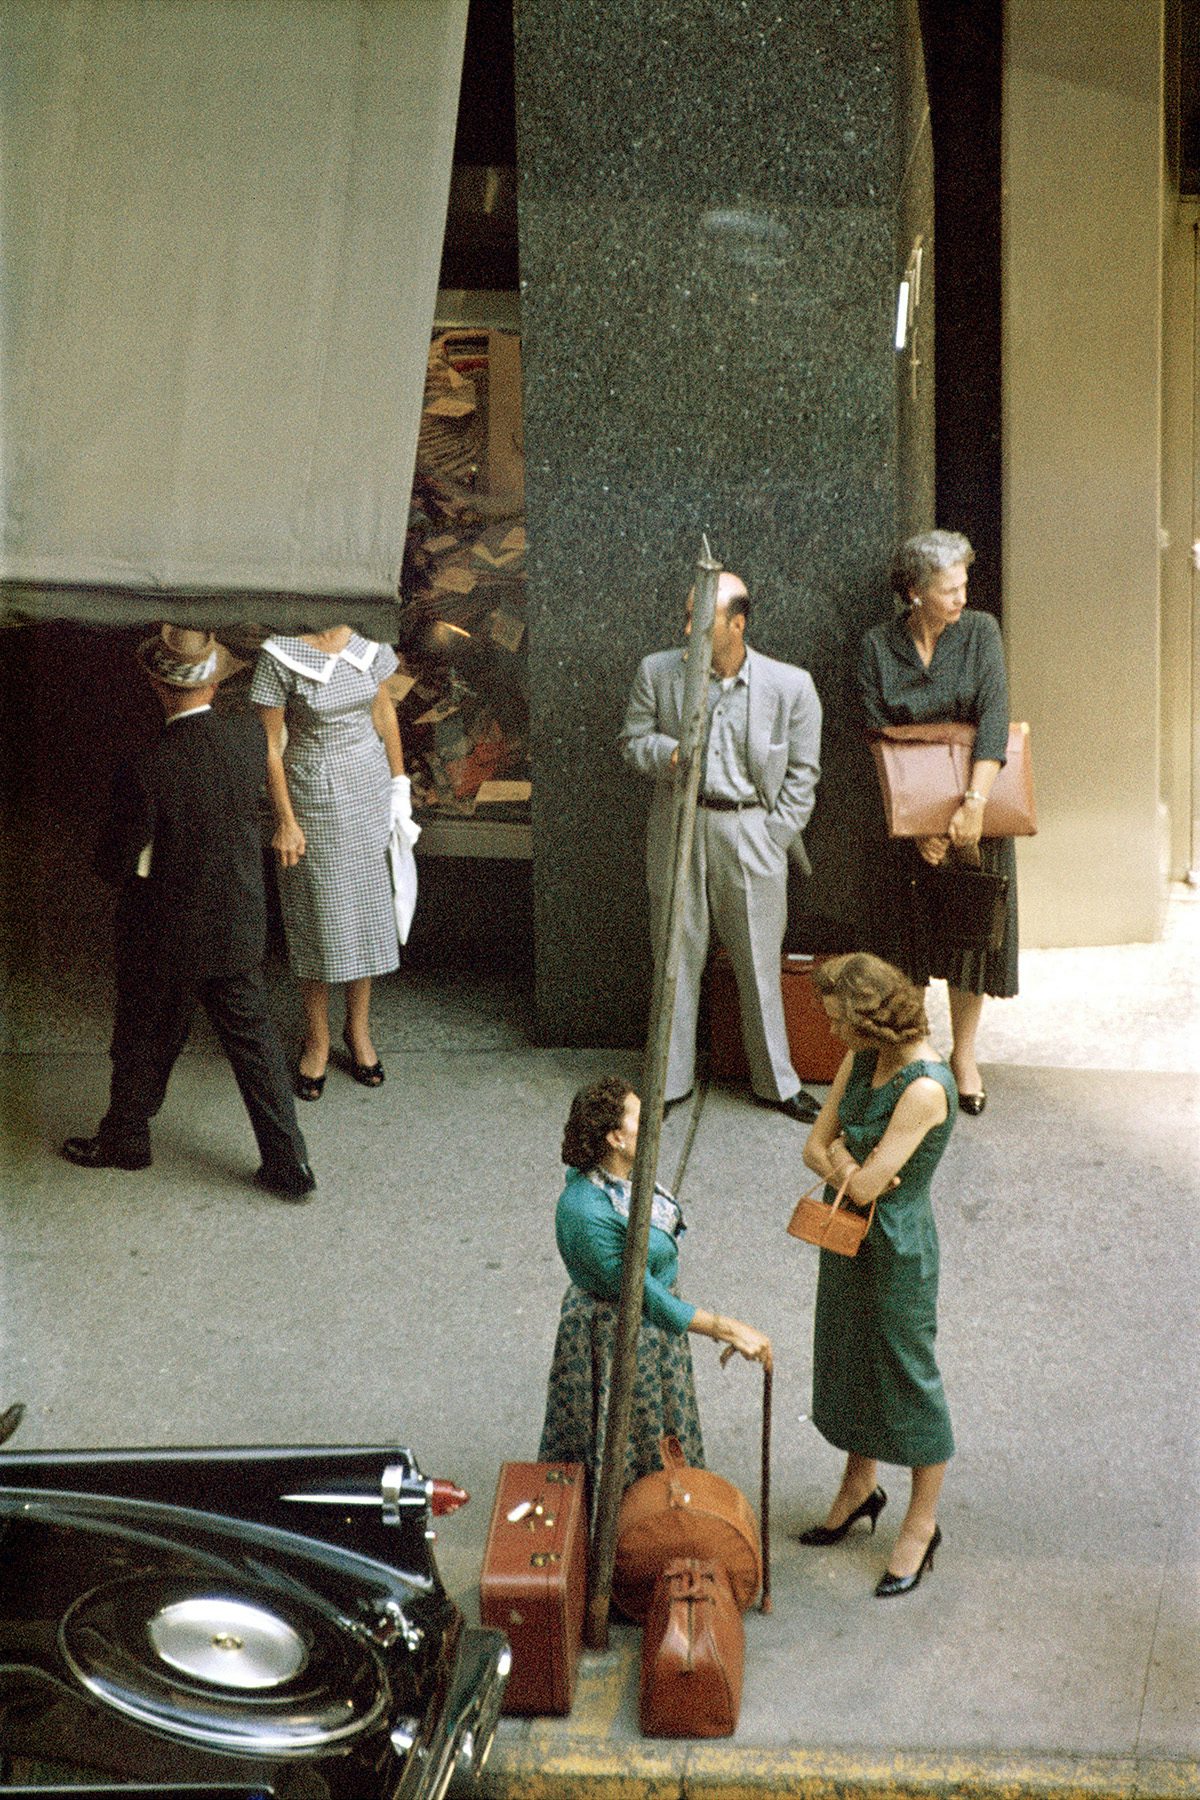 Photograph by Saul Leiter of two women standing next to luggage cases on a pavement